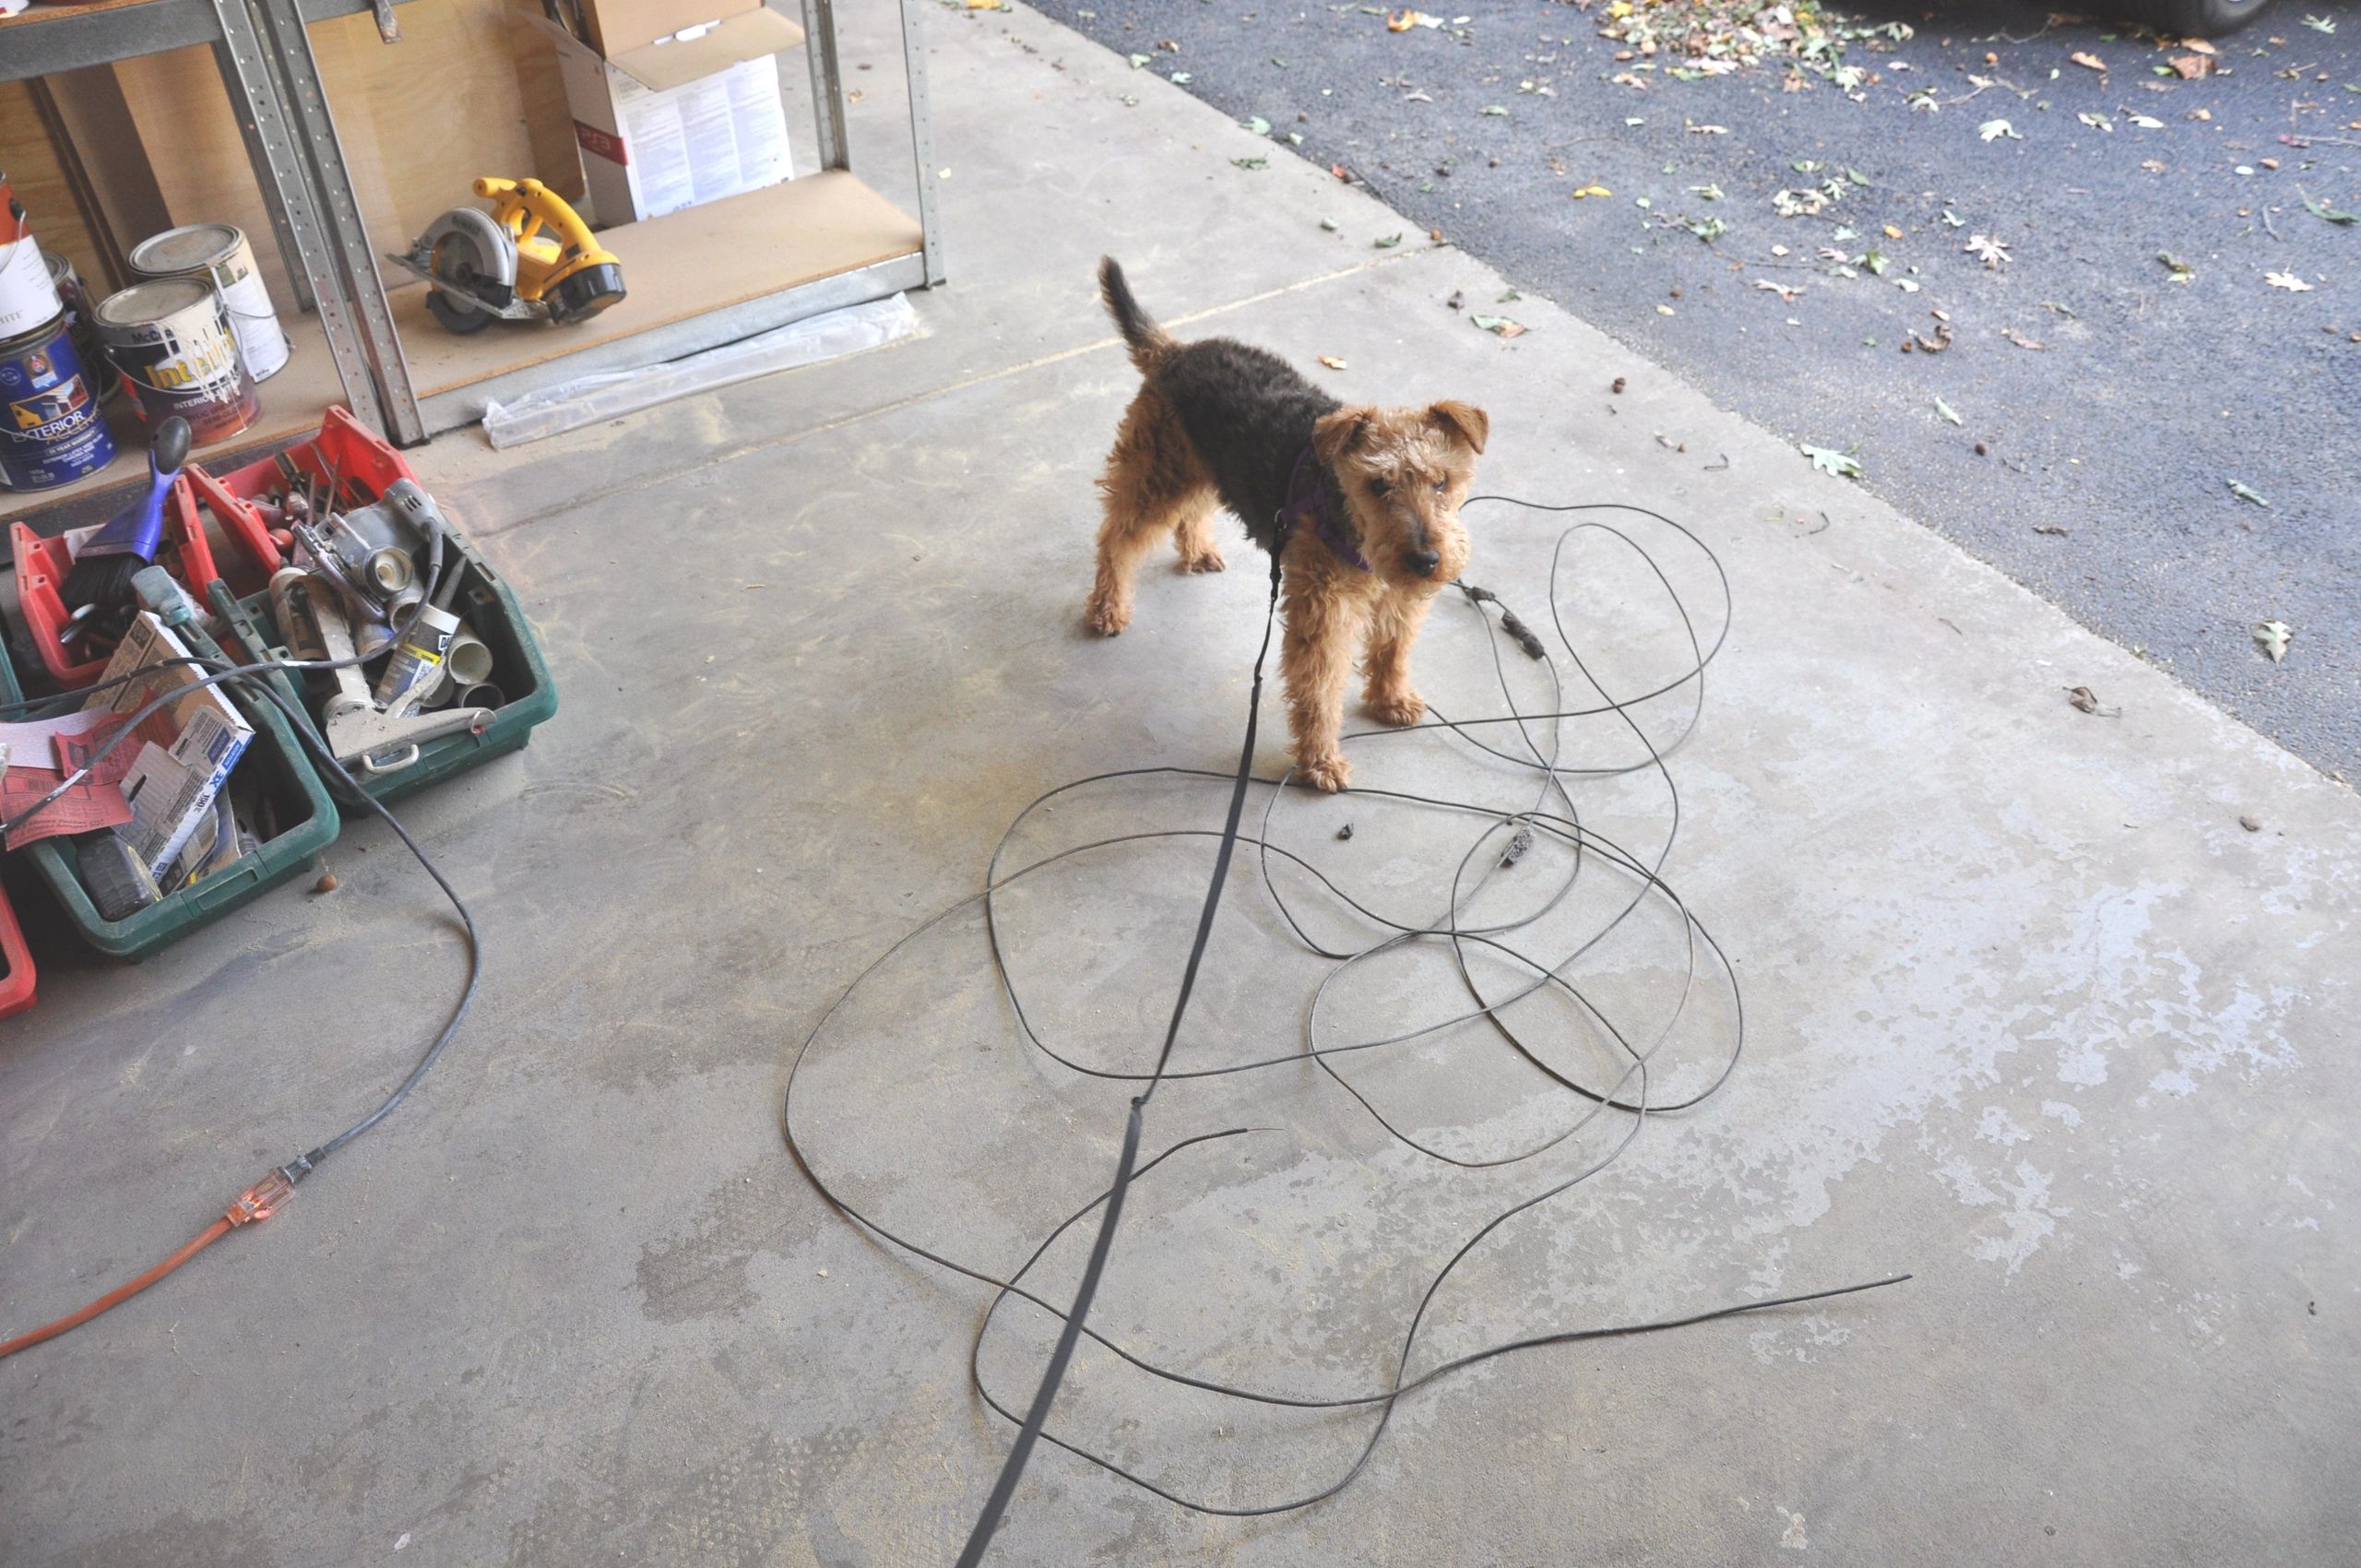 Georgie_with_Severed_Electric_Fence_Piece.jpg